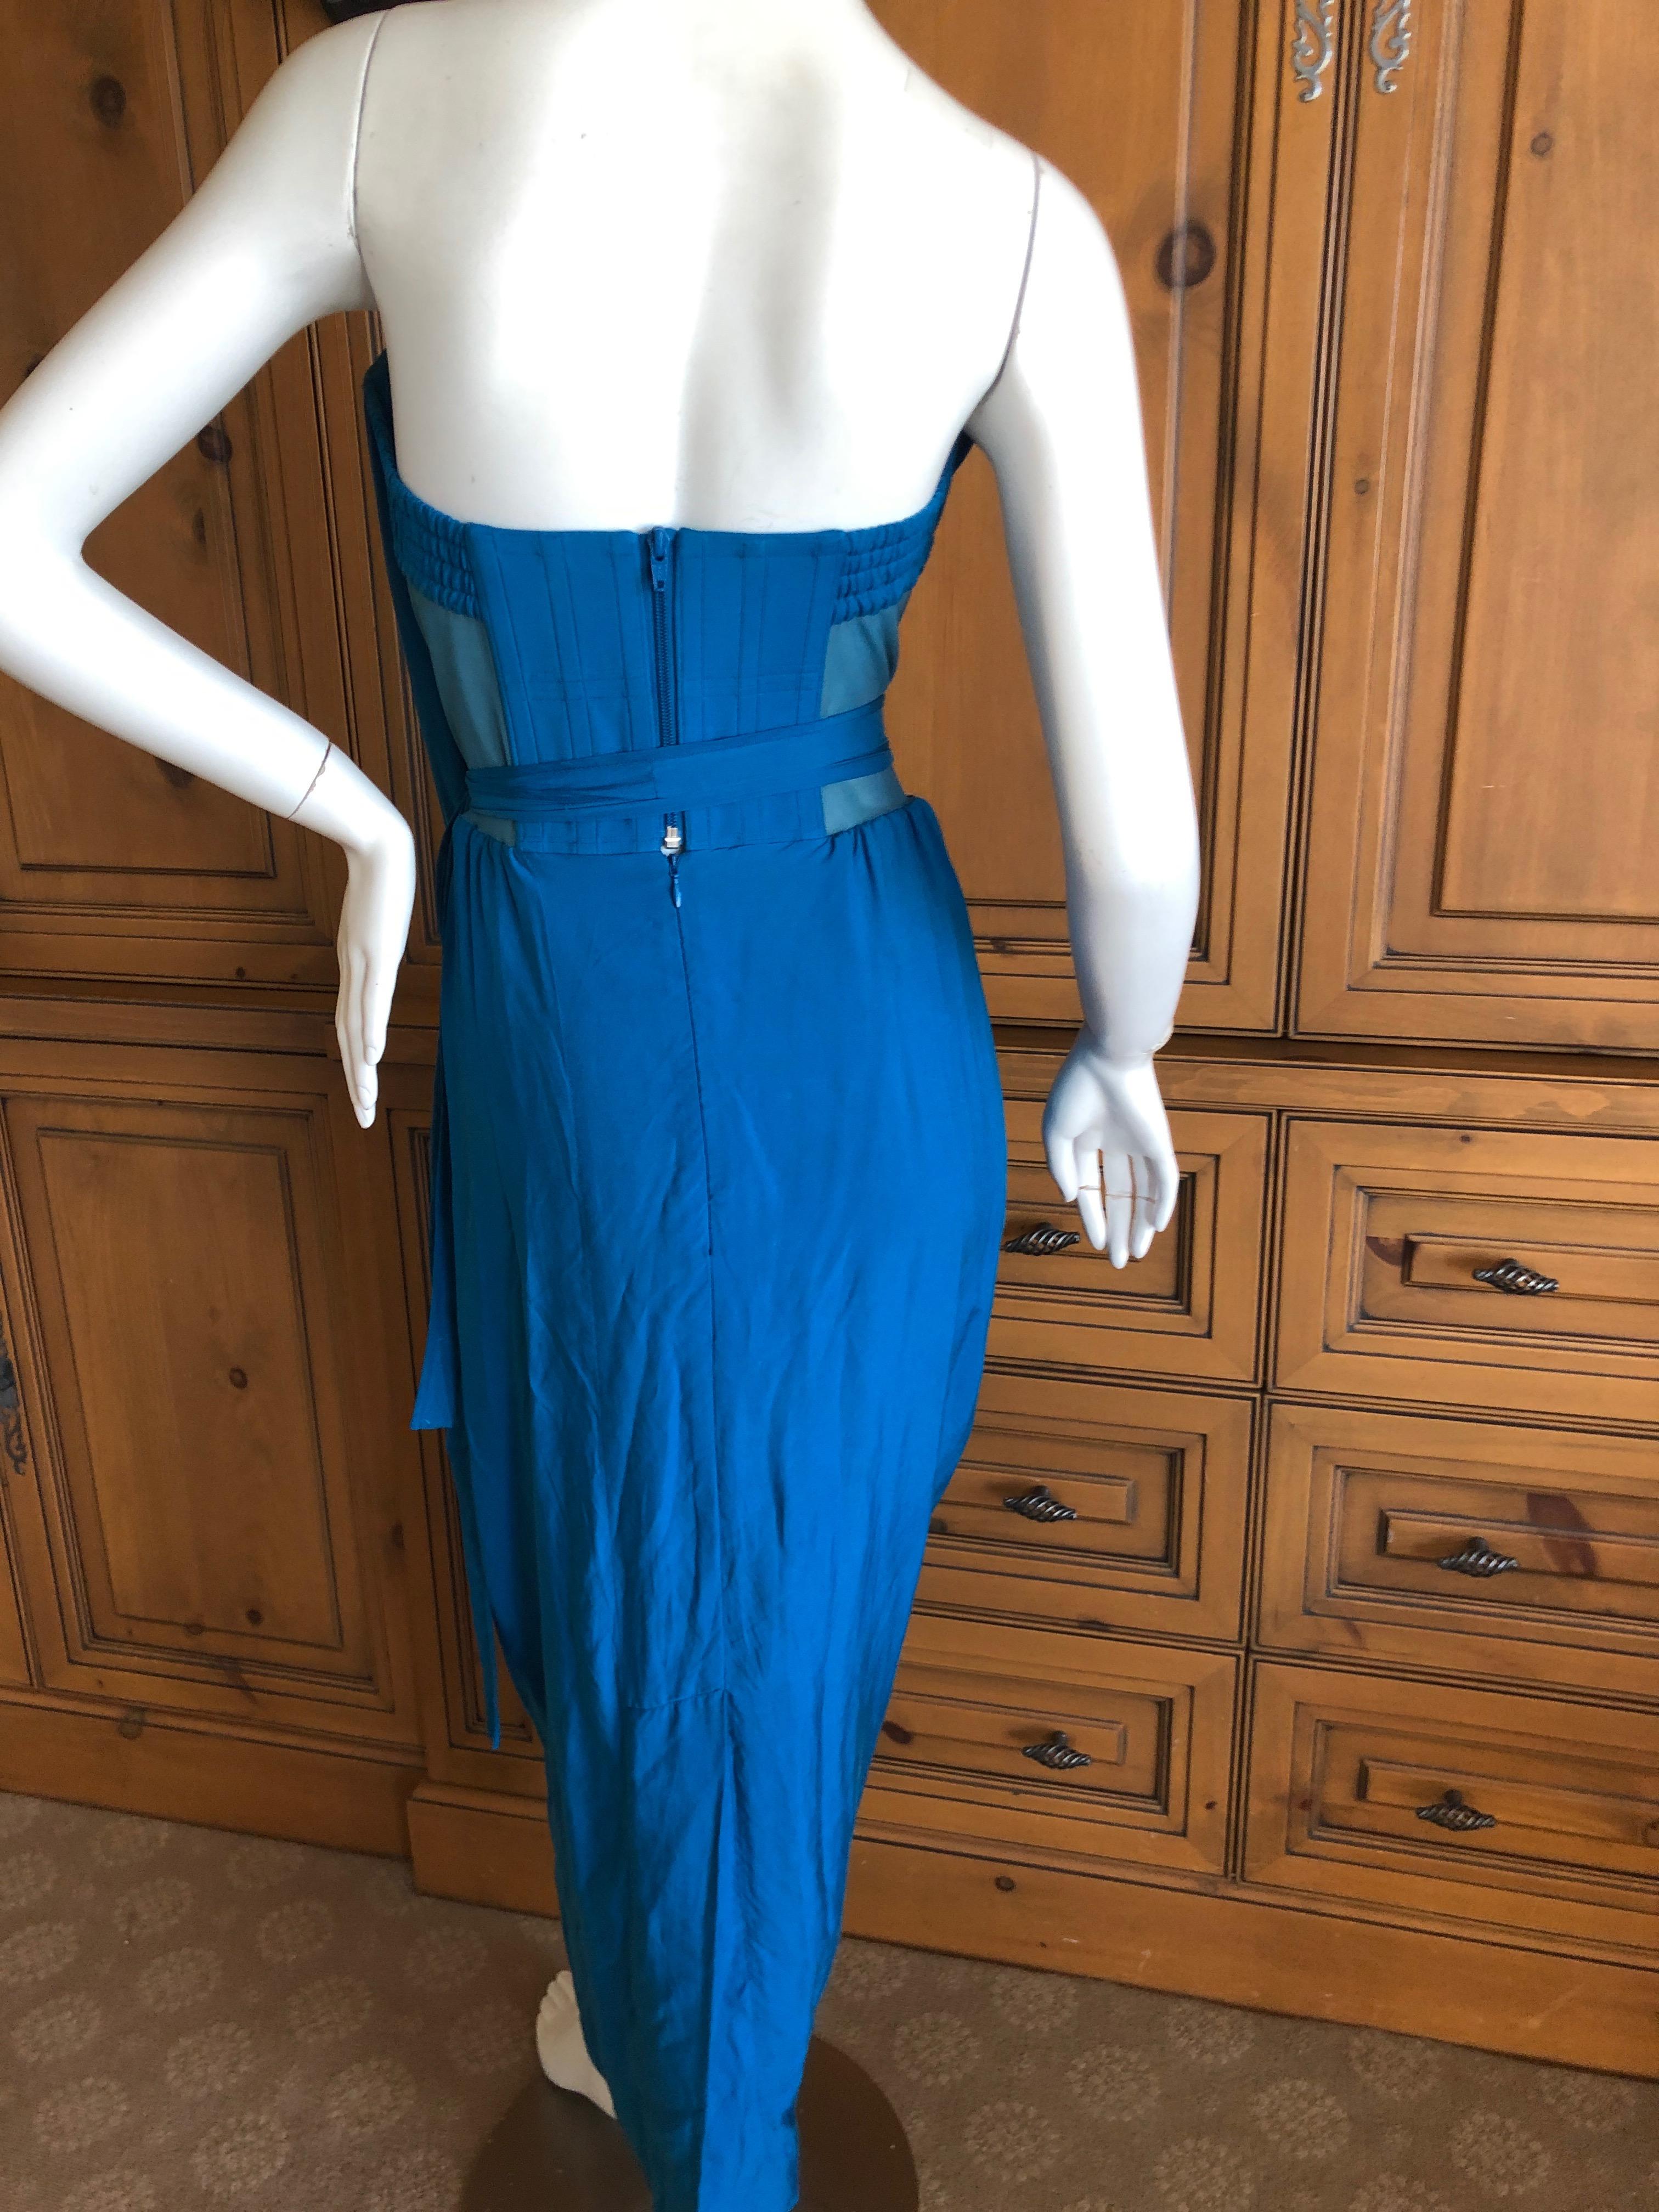 Andreas Kronthaler for Vivienne Westwood Blue Evening Dress with Built In Corset For Sale 3